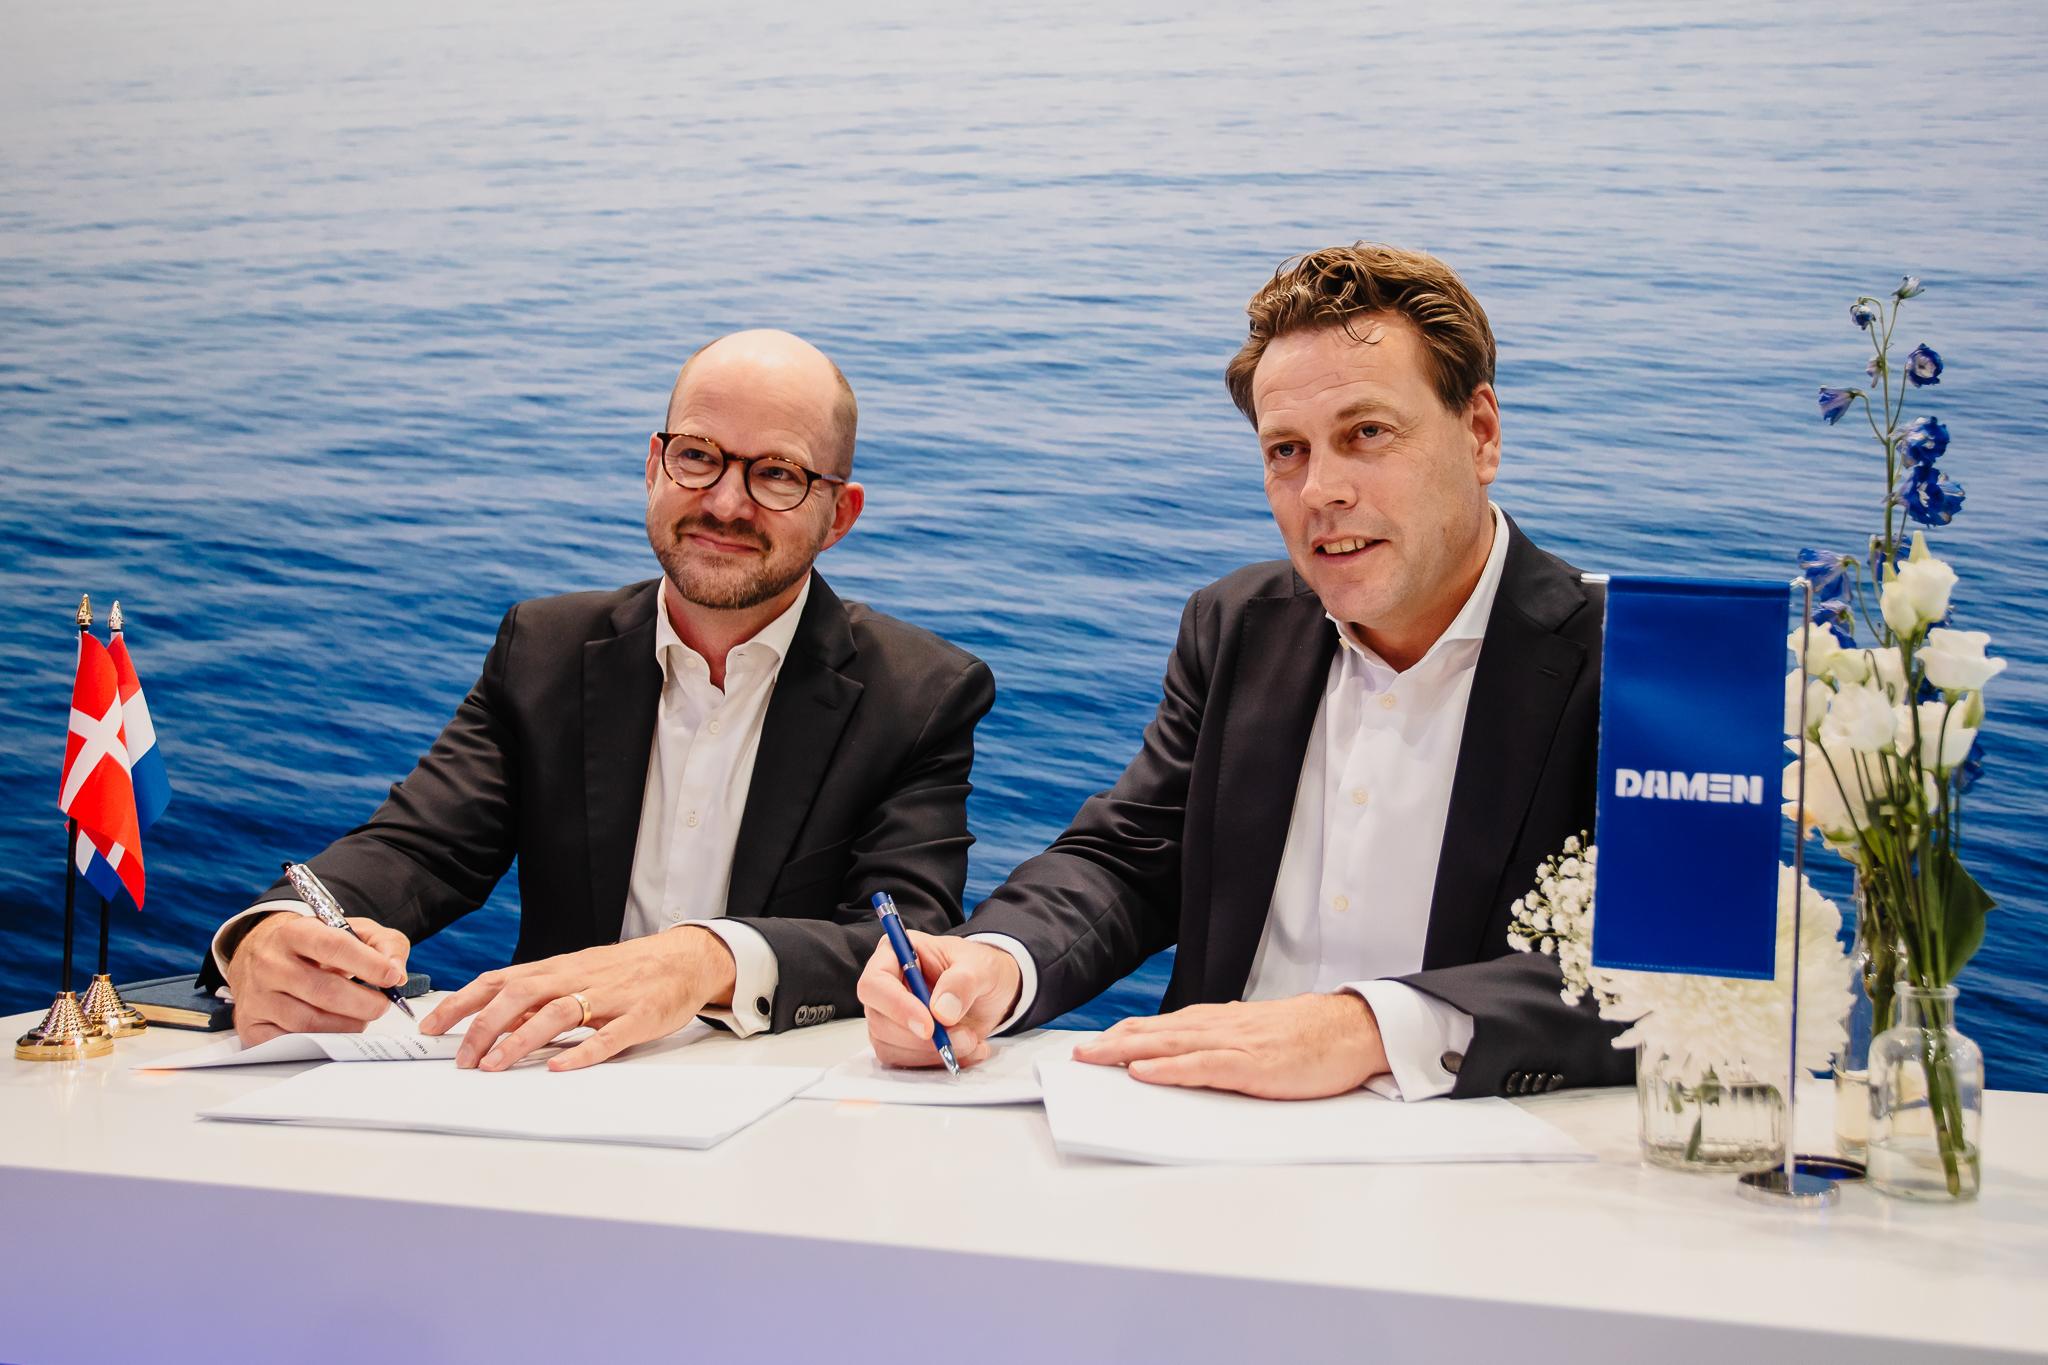 Damen Green Solutions and Bawat A/S joint venture marks official signing for Mobile Ballast Water Management Systems